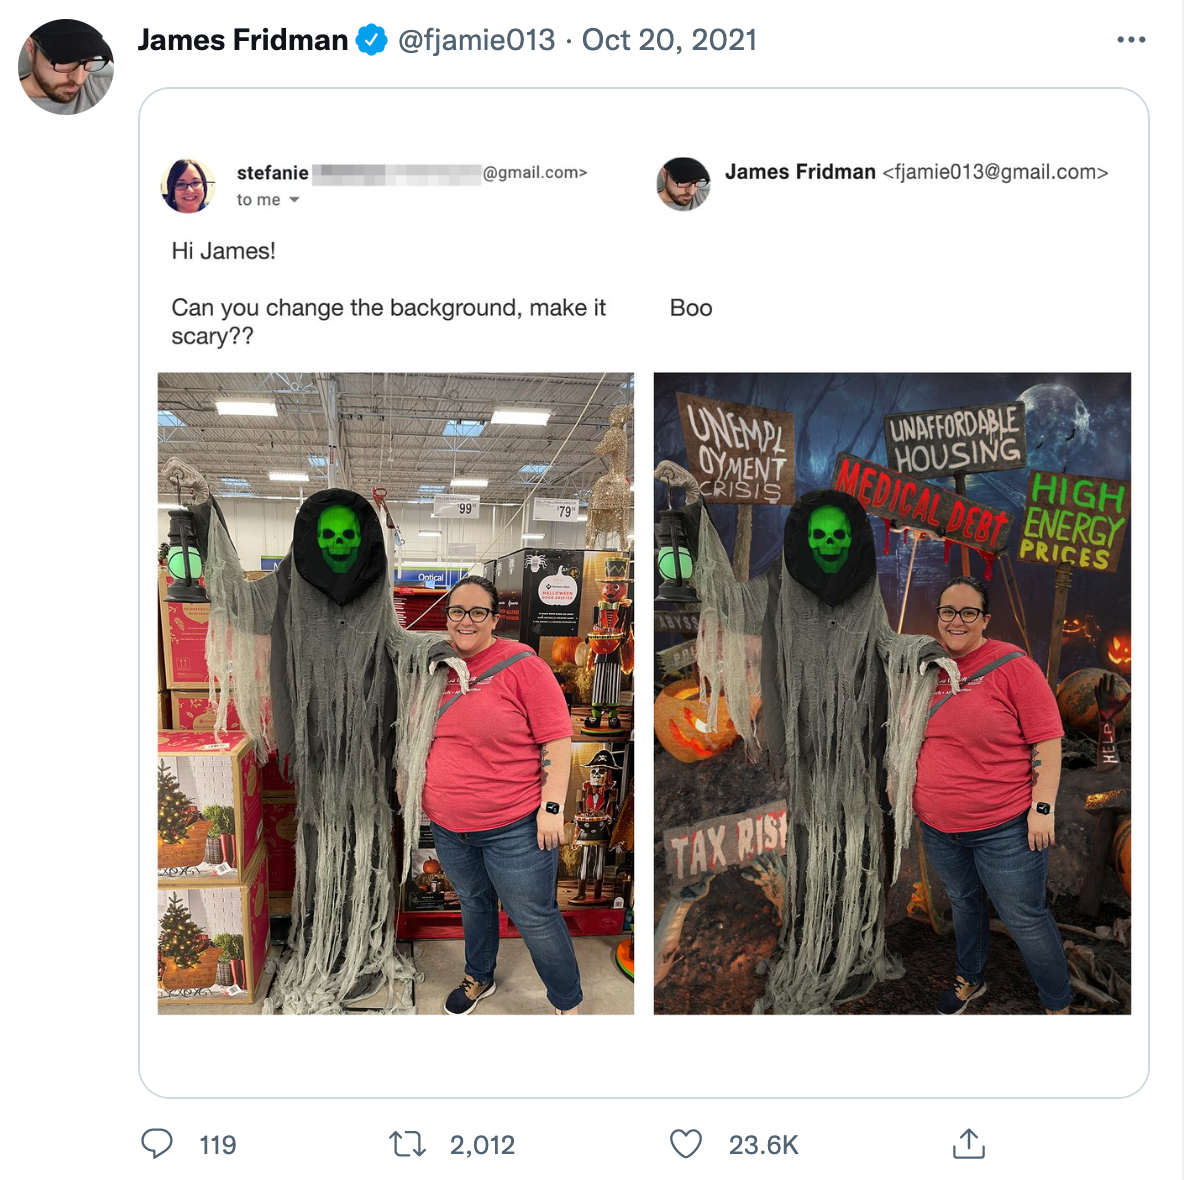 wholesome photoshop edits - website - James Fridman stefanie to me Hi James! 119 . .com Can you change the background, make it scary?? 2,012 Pode Boo 141 James Fridman  Oyment Crisis Tax Rish Unaffordable Housing Dest High Energy Prices